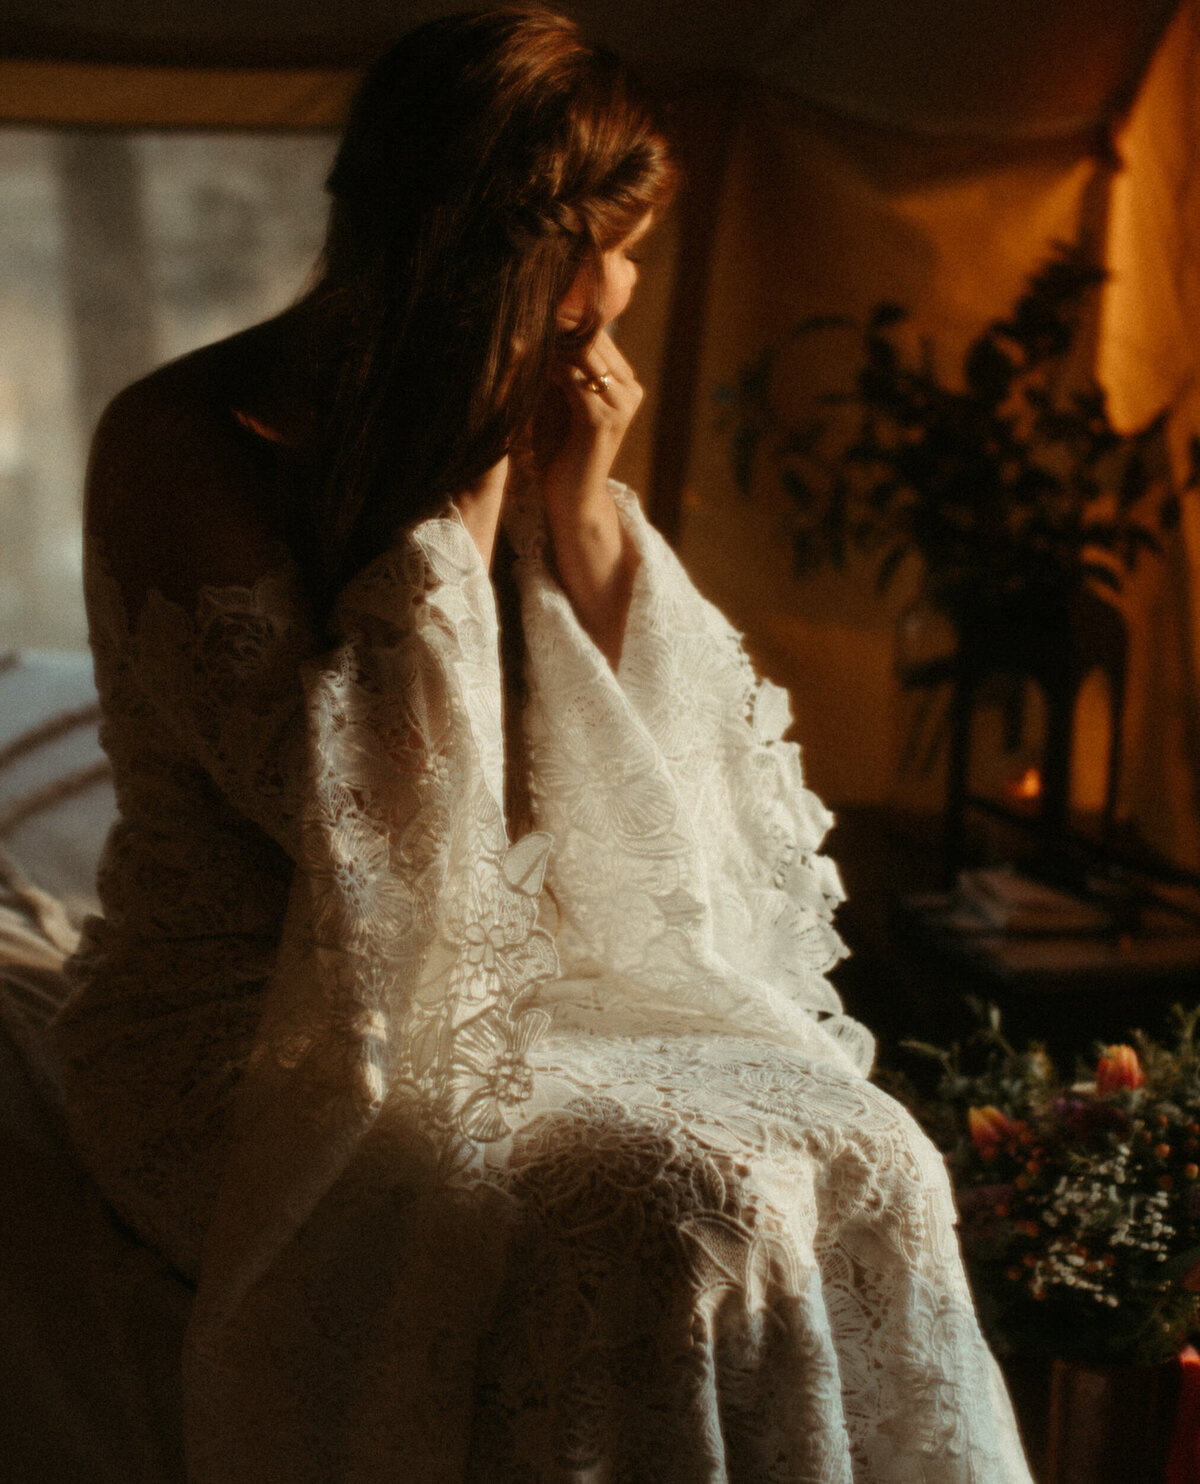 Bride in boho wedding dress with big sleeves getting ready and putting earrings in inside tent before elopement